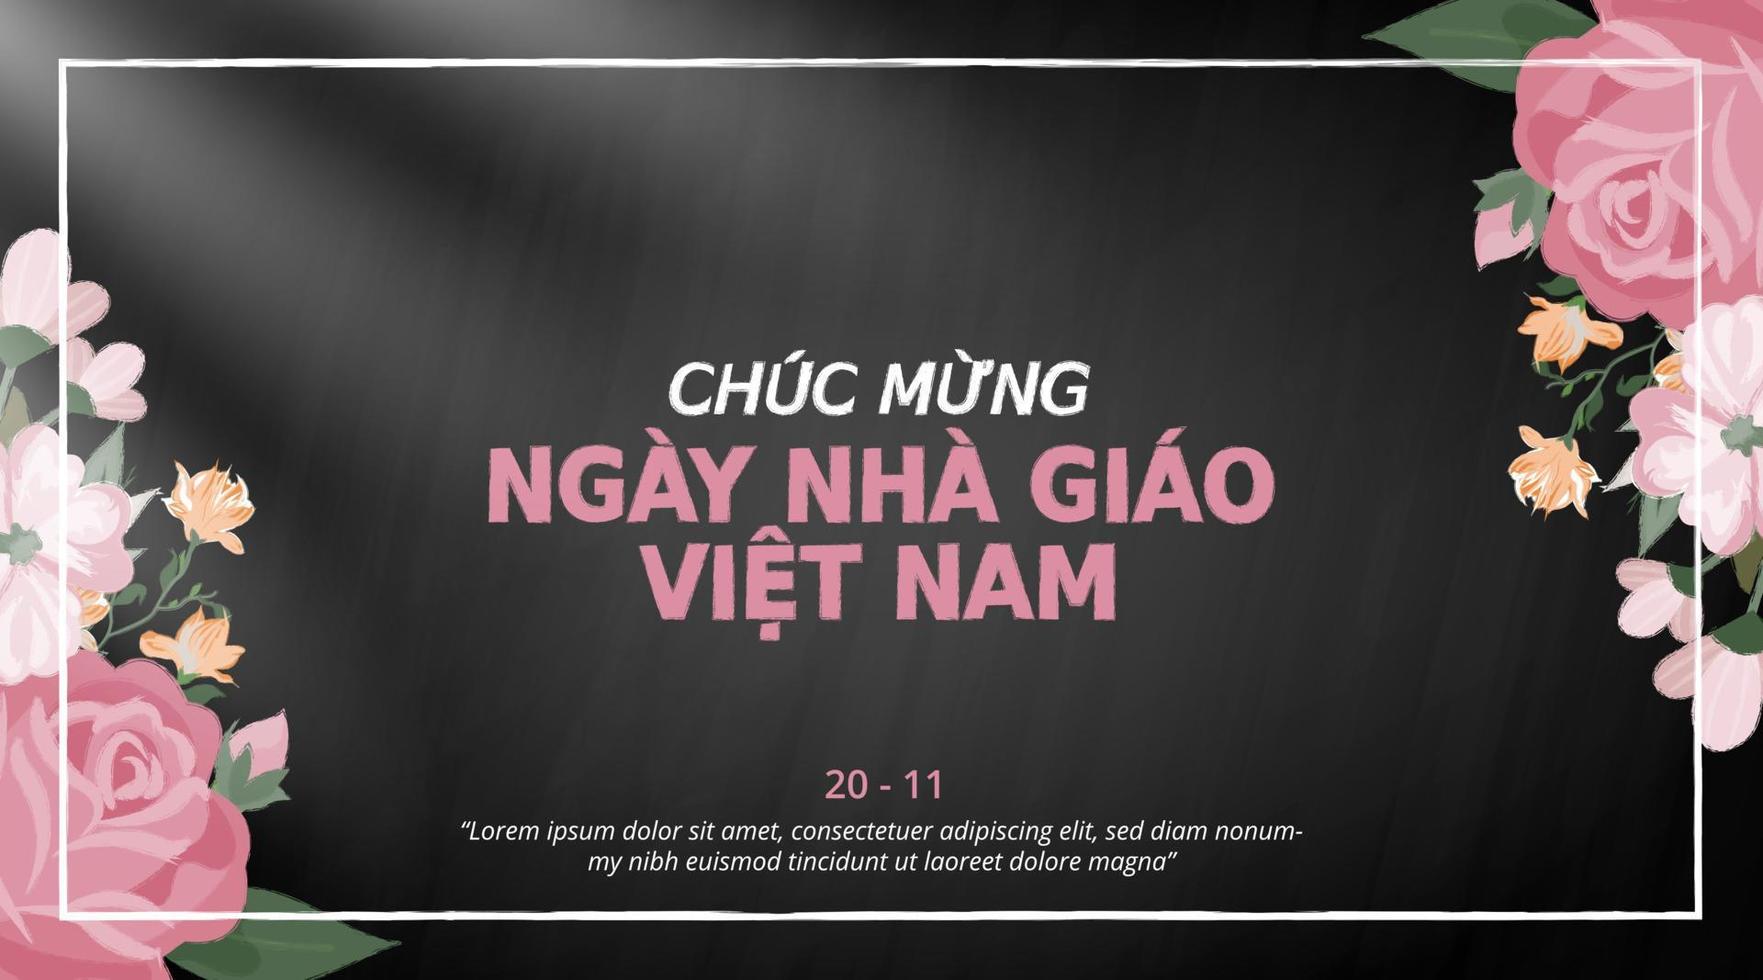 Chuc mung ngay nha giao Viet Nam or happy Vietnamese teachers day background with chalk flower decoration on a chalkboard vector